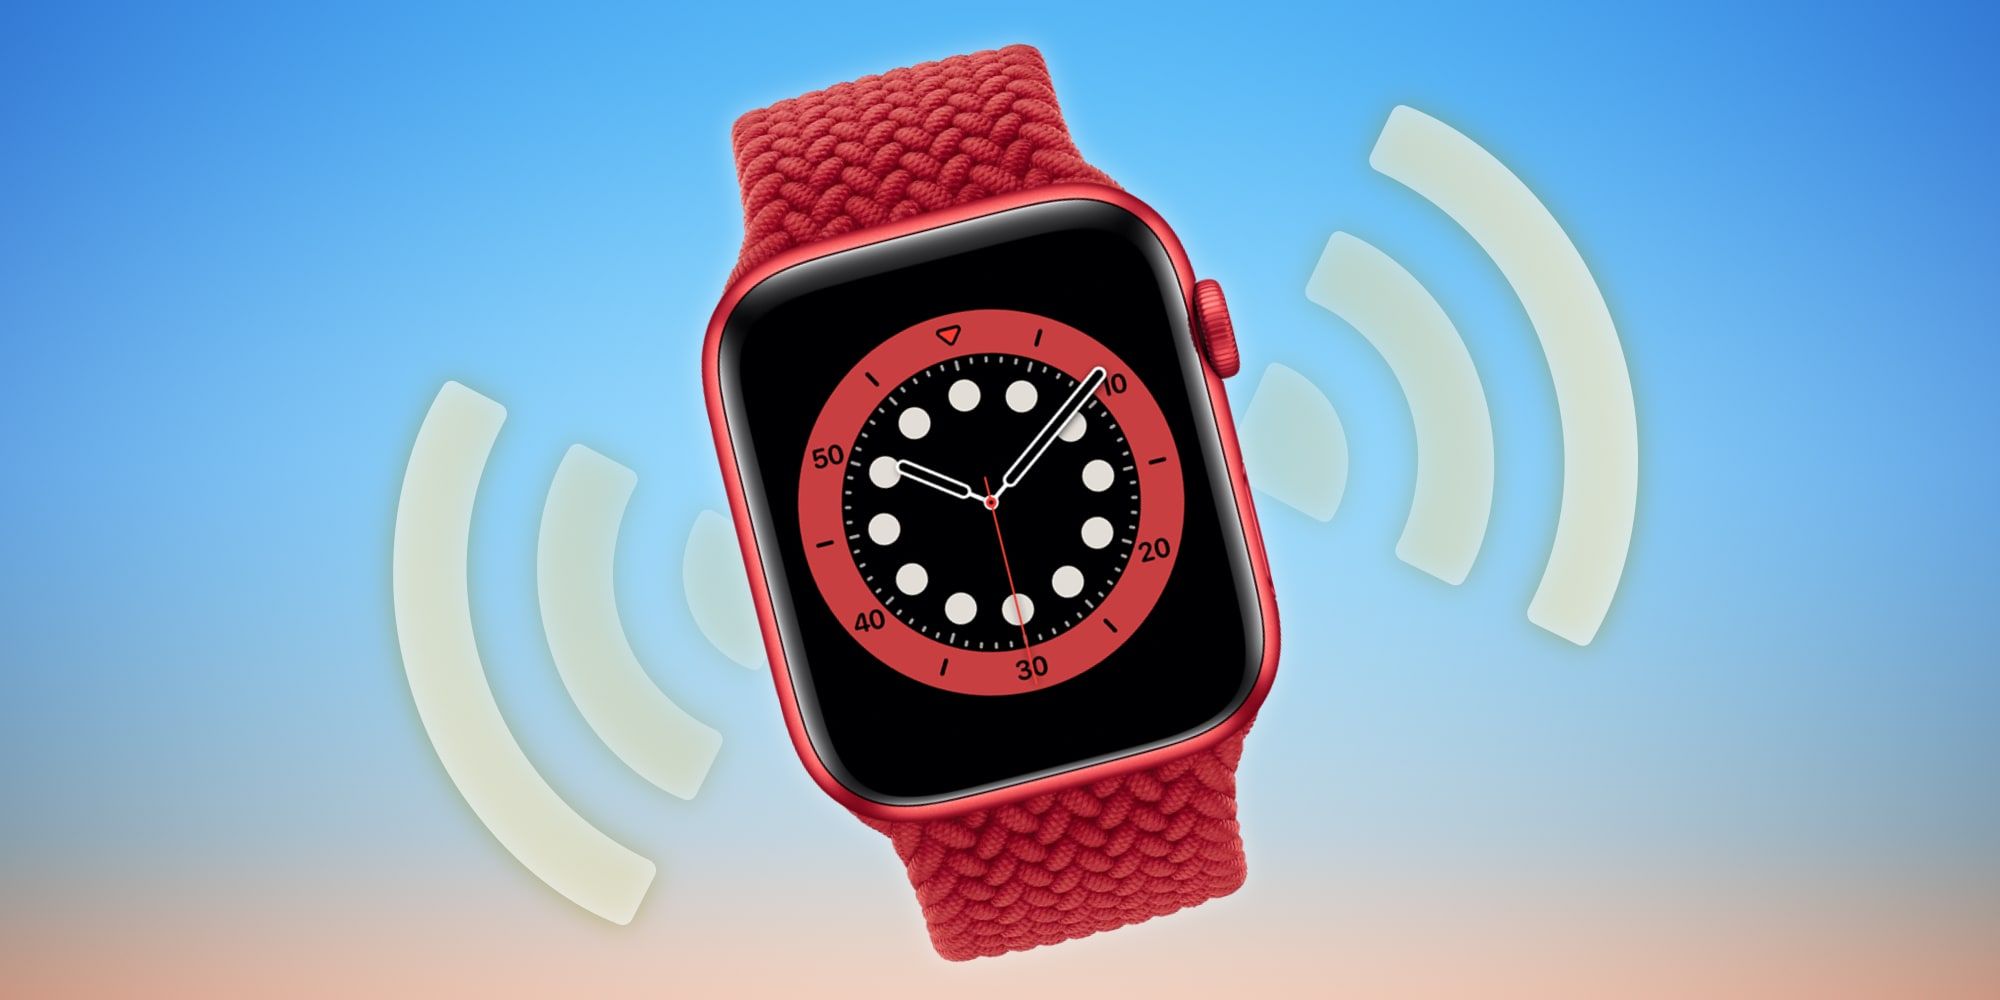 How To Set An Alarm On An Apple Watch | Screen Rant - Informone